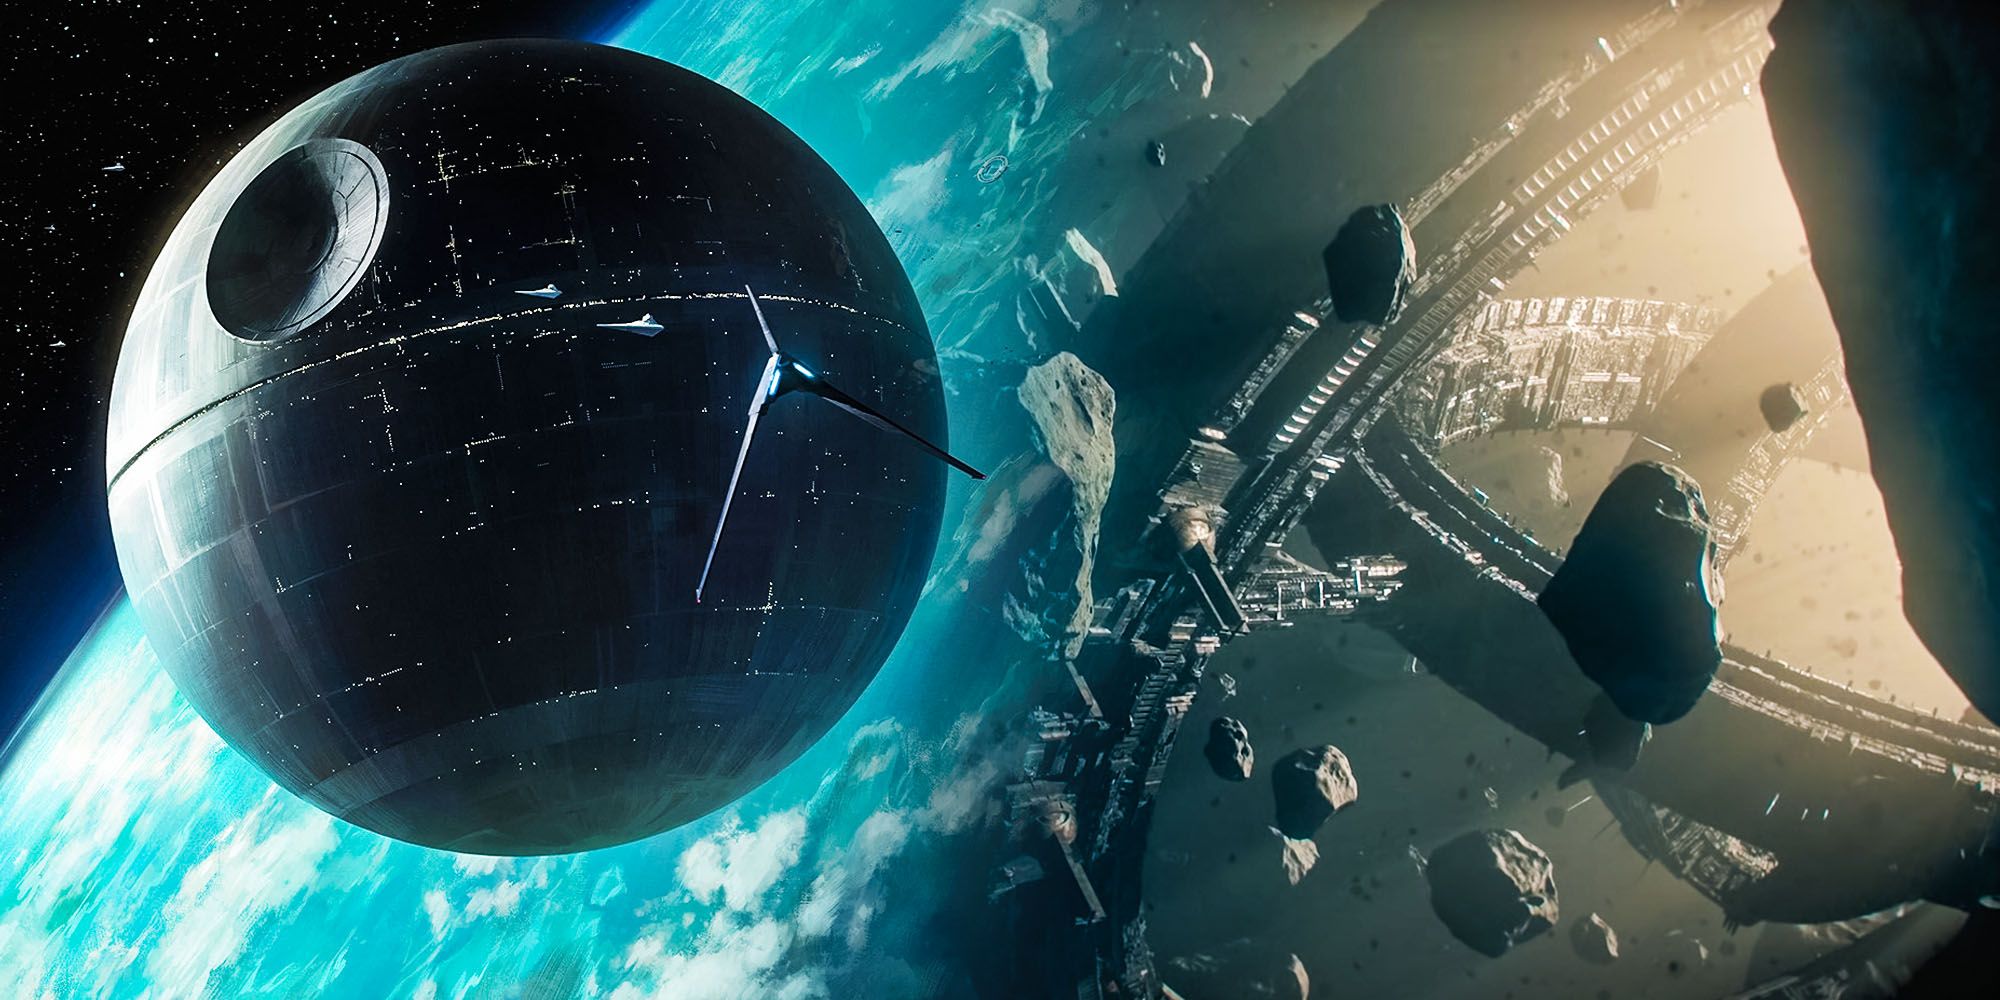 How Foundations Invictus Compares To Star Wars Death Star